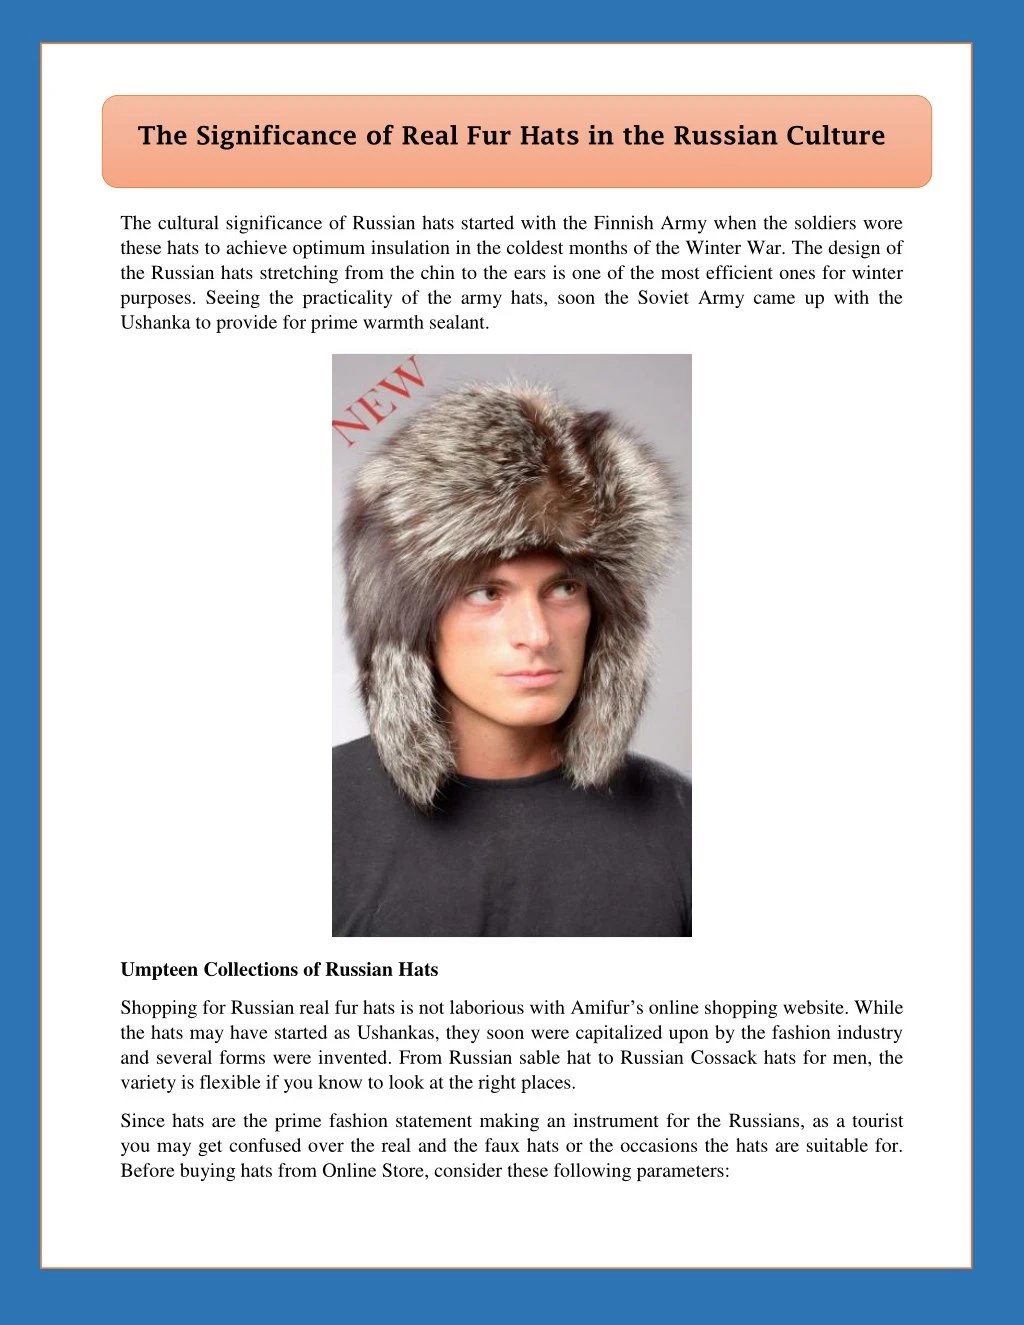 the significance of real fur hats in the russian